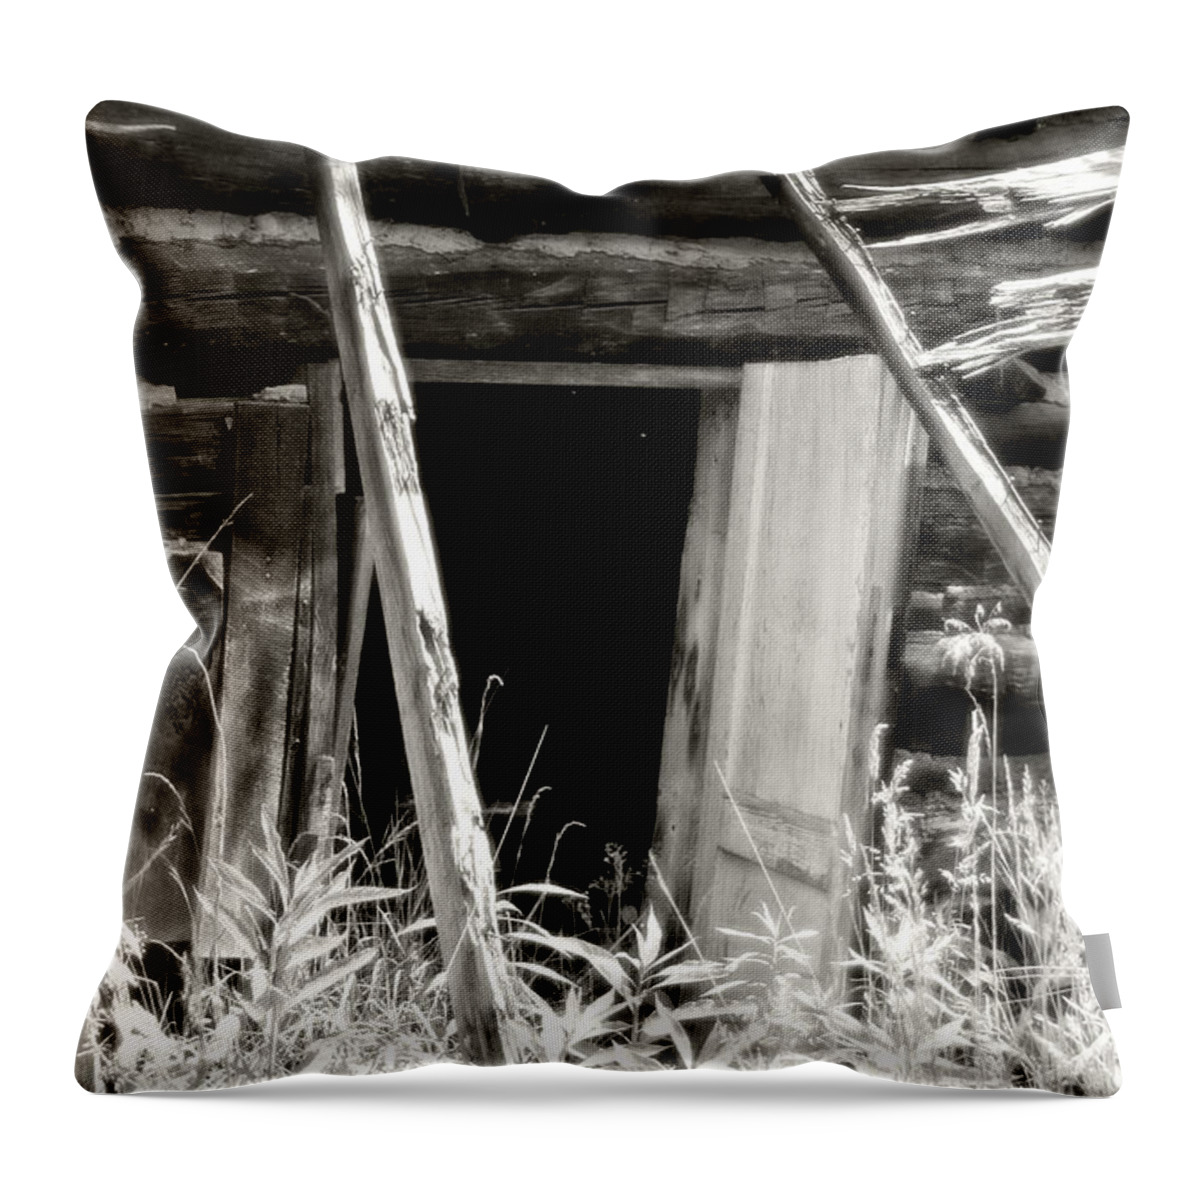 Barn Throw Pillow featuring the photograph Old Tobacco Barn by Michael Allen